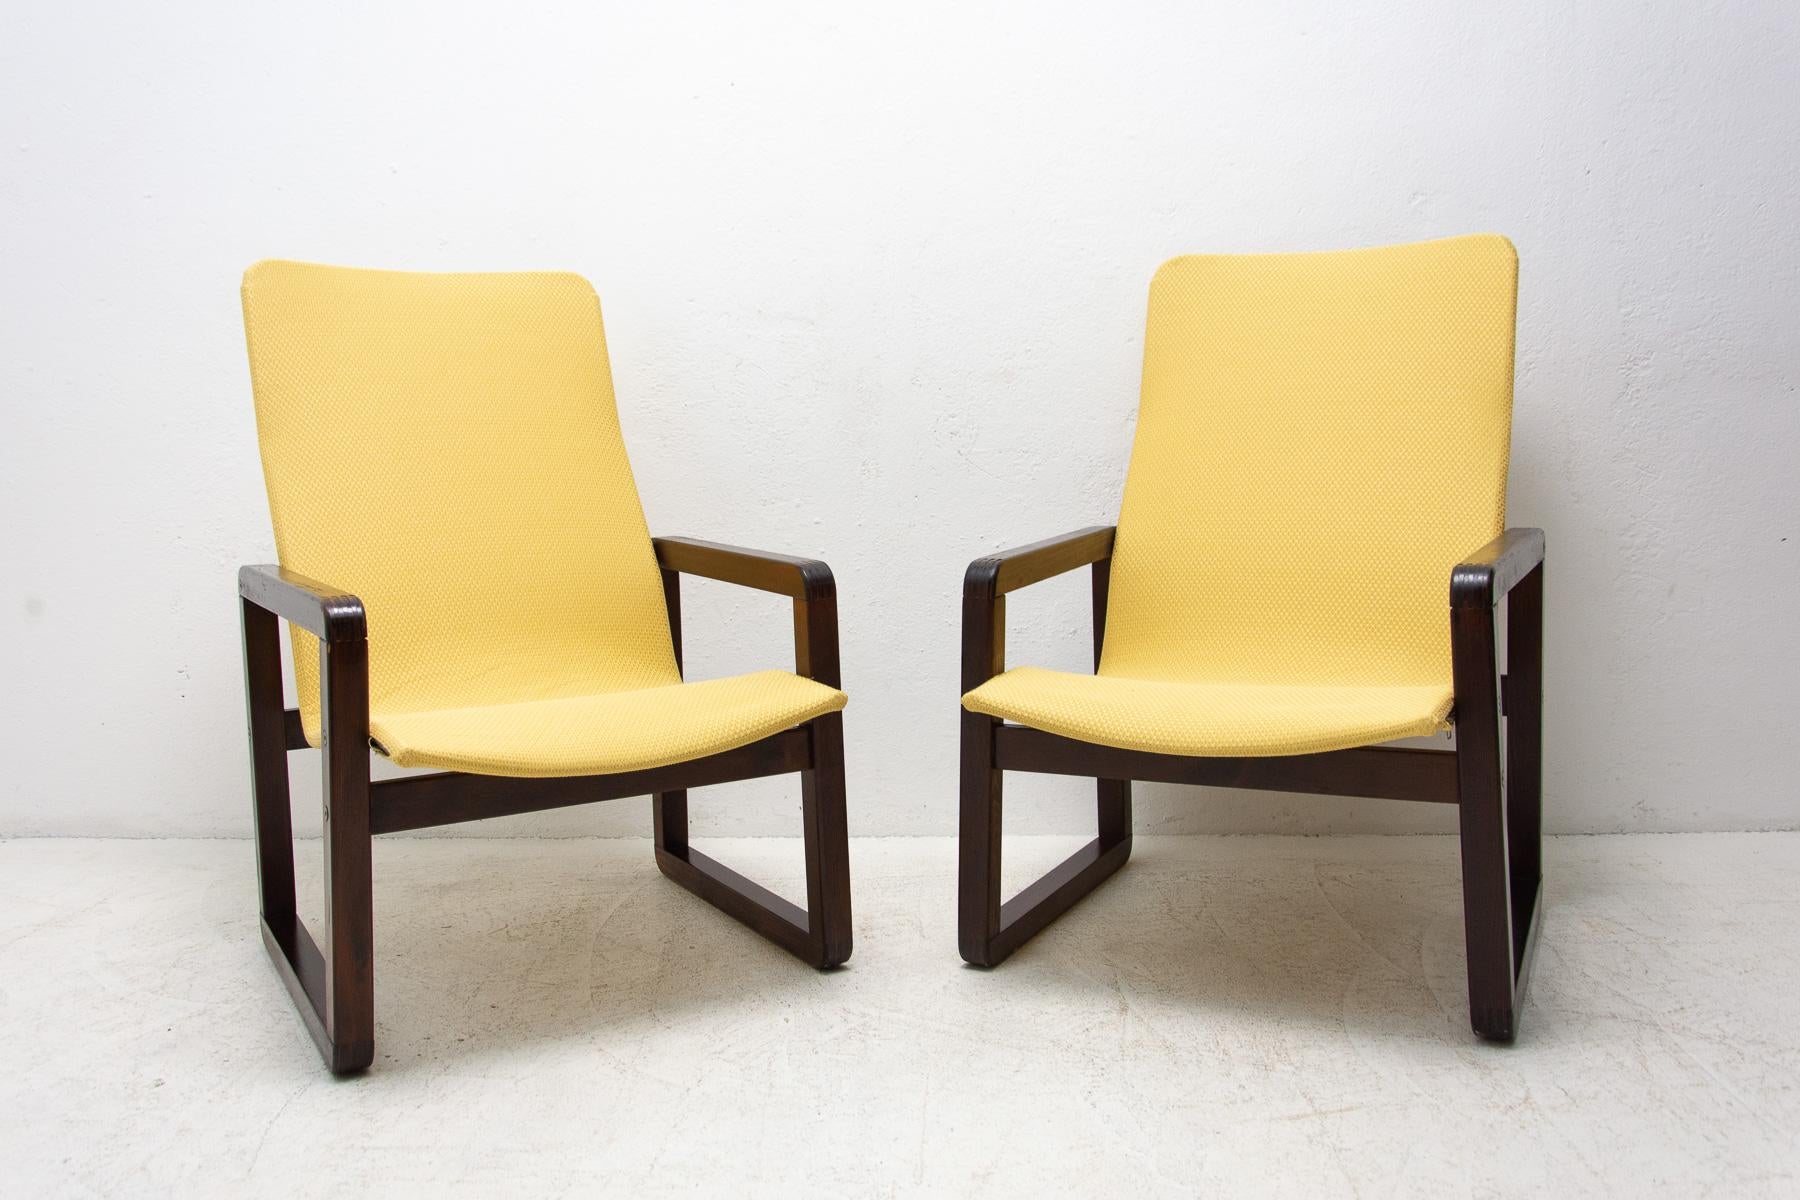 Vintage scandinavian style armchairs, made in the 1980's in the former Czechoslovakia. The structure is made of beech wood, the chairs have a new fabric placed on the wooden seats. In very good Vintage condition, showing slight signs of age and